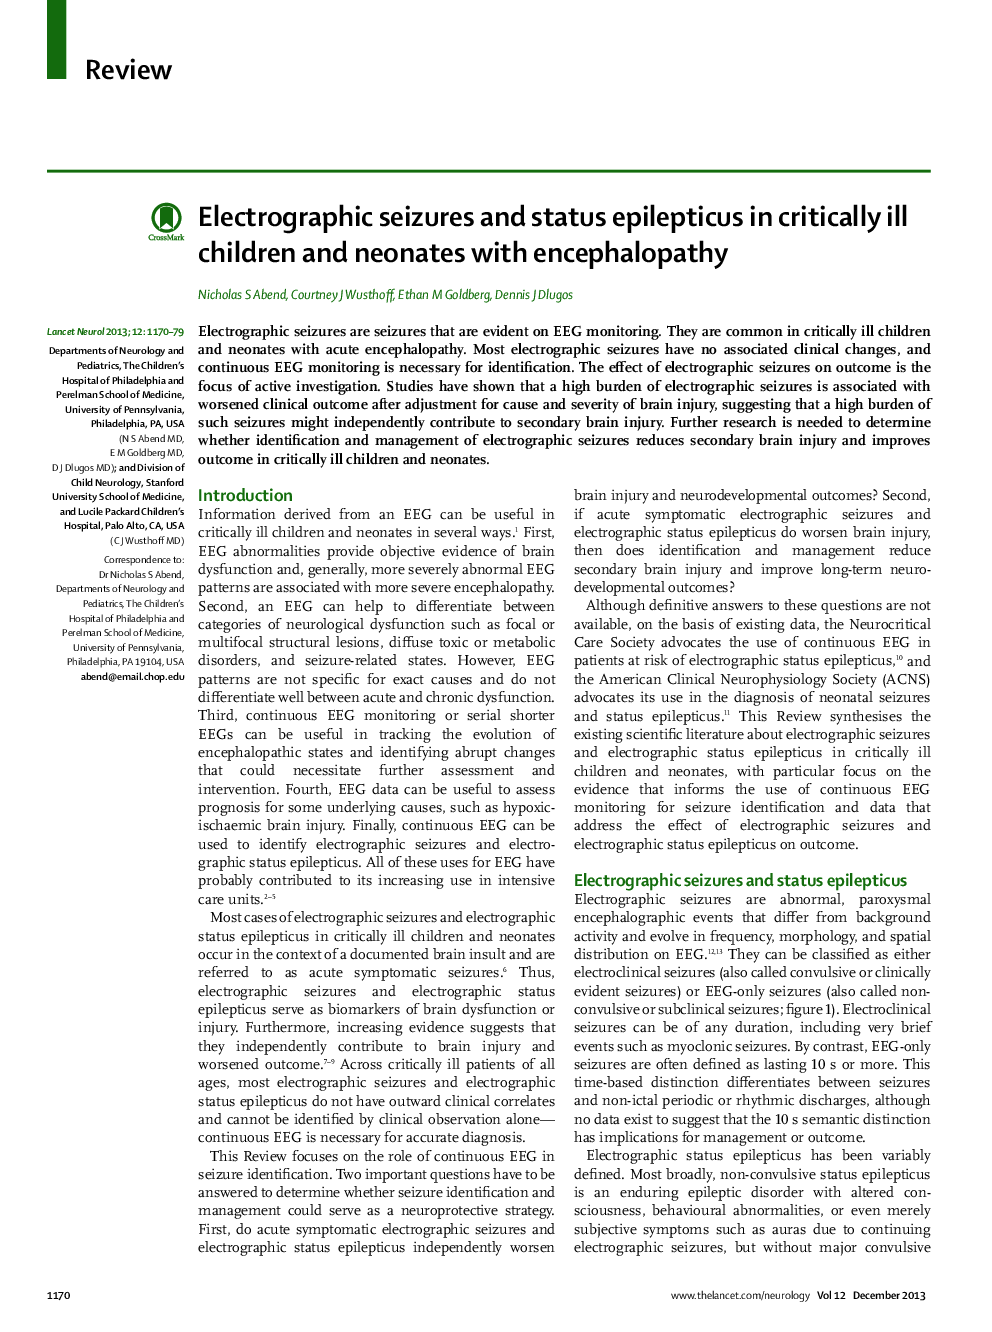 Electrographic seizures and status epilepticus in critically ill children and neonates with encephalopathy